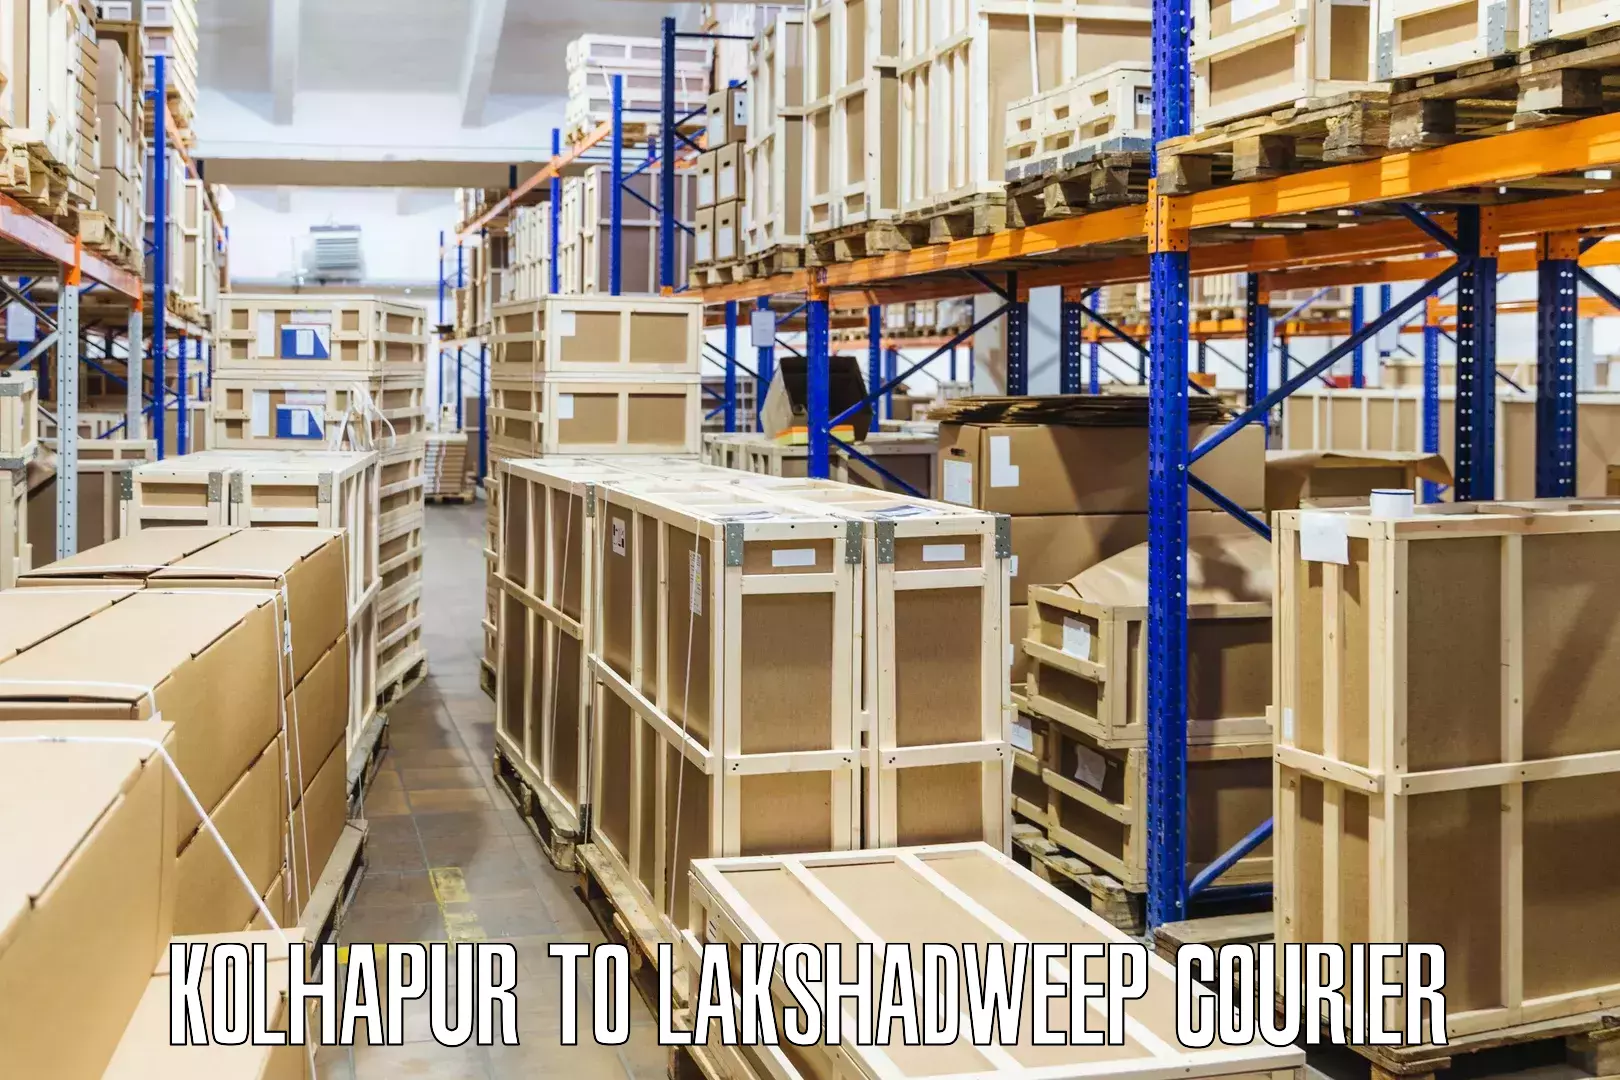 Easy access courier services in Kolhapur to Lakshadweep